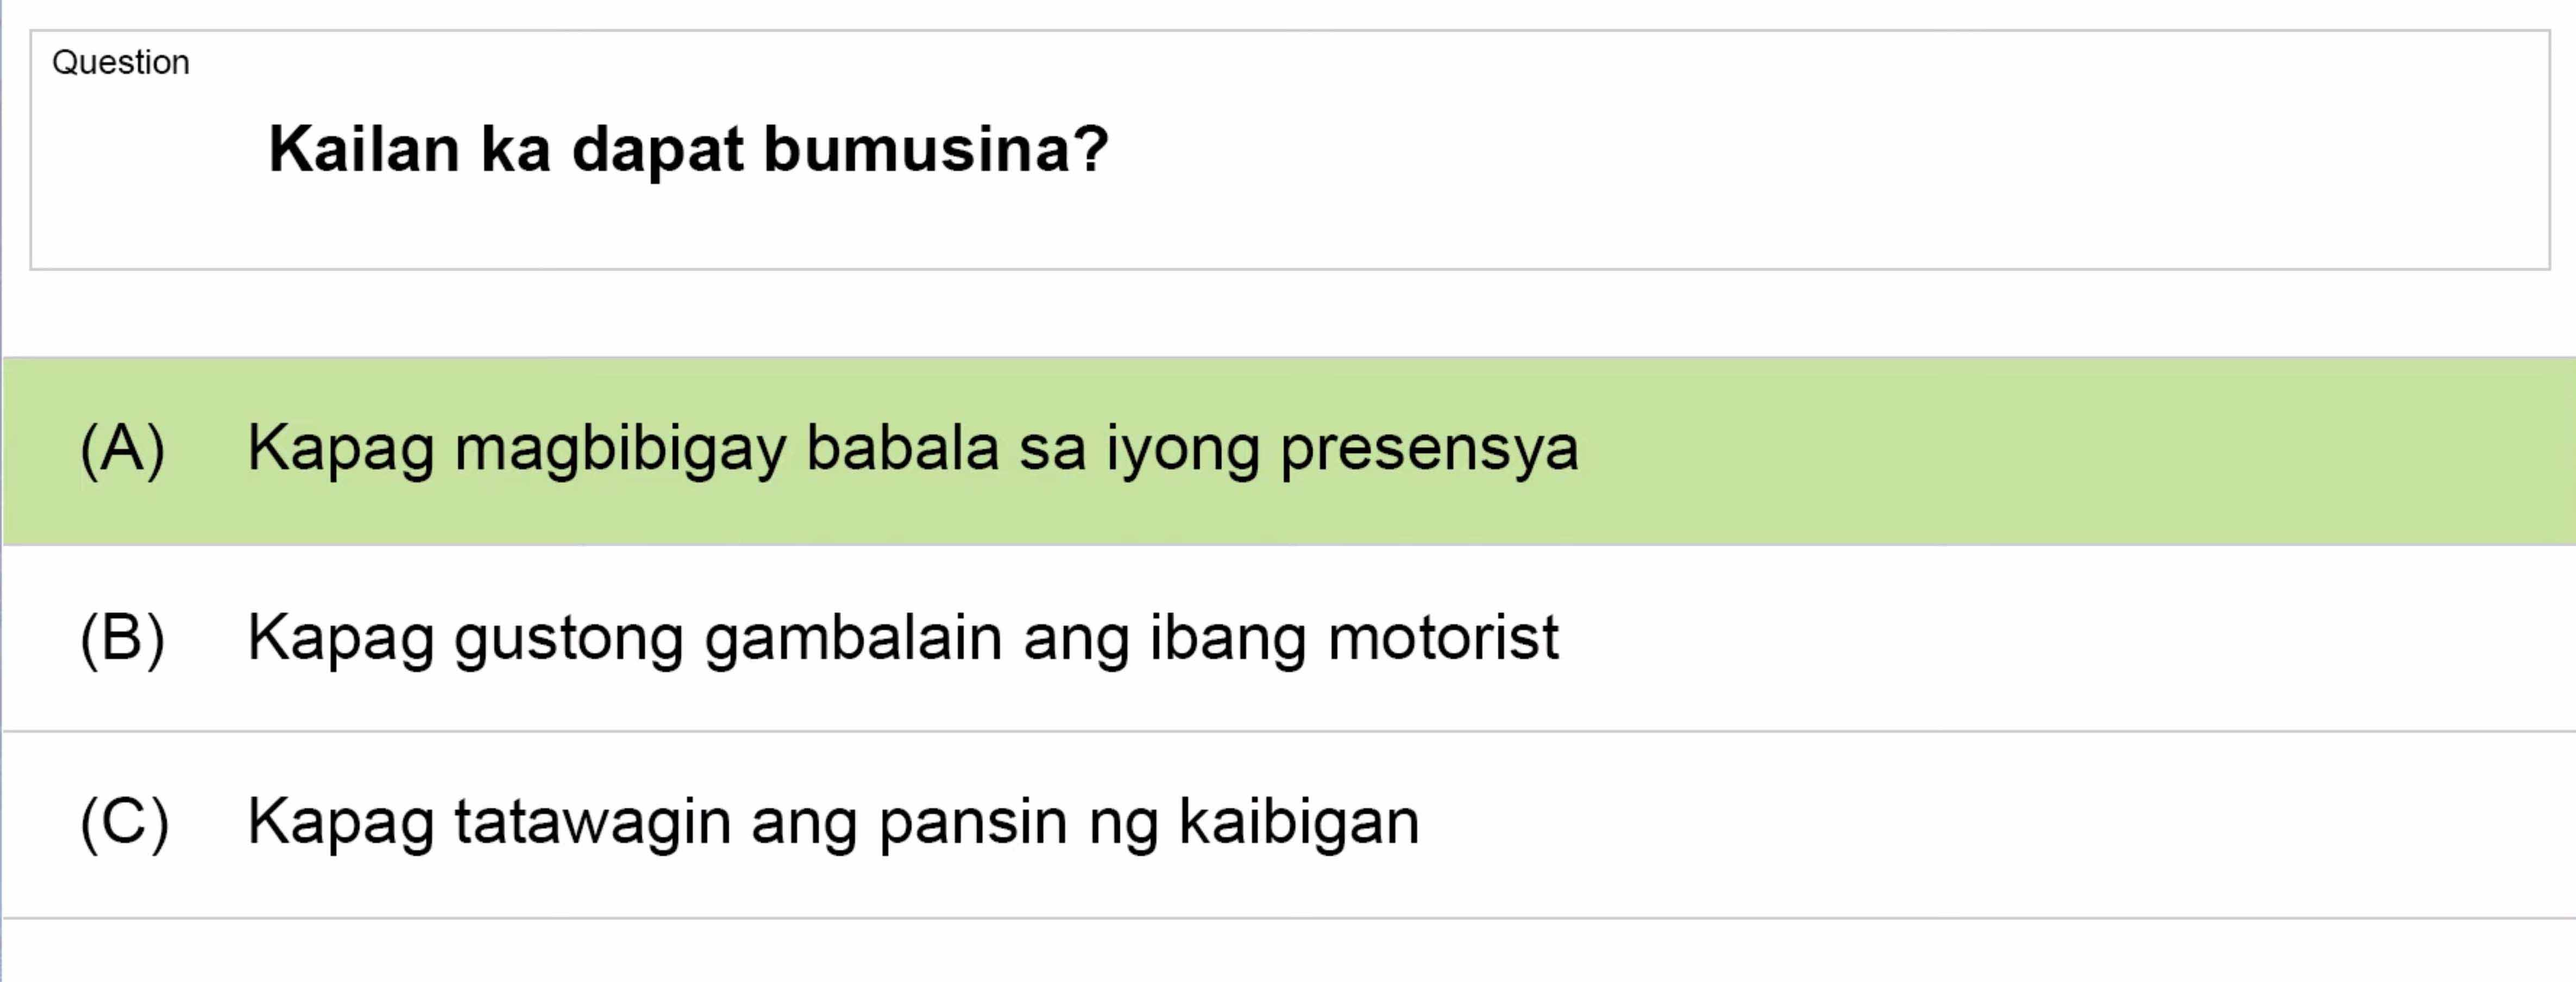 LTO Tagalog non professional exam reviewer light vehicle 2 (50)